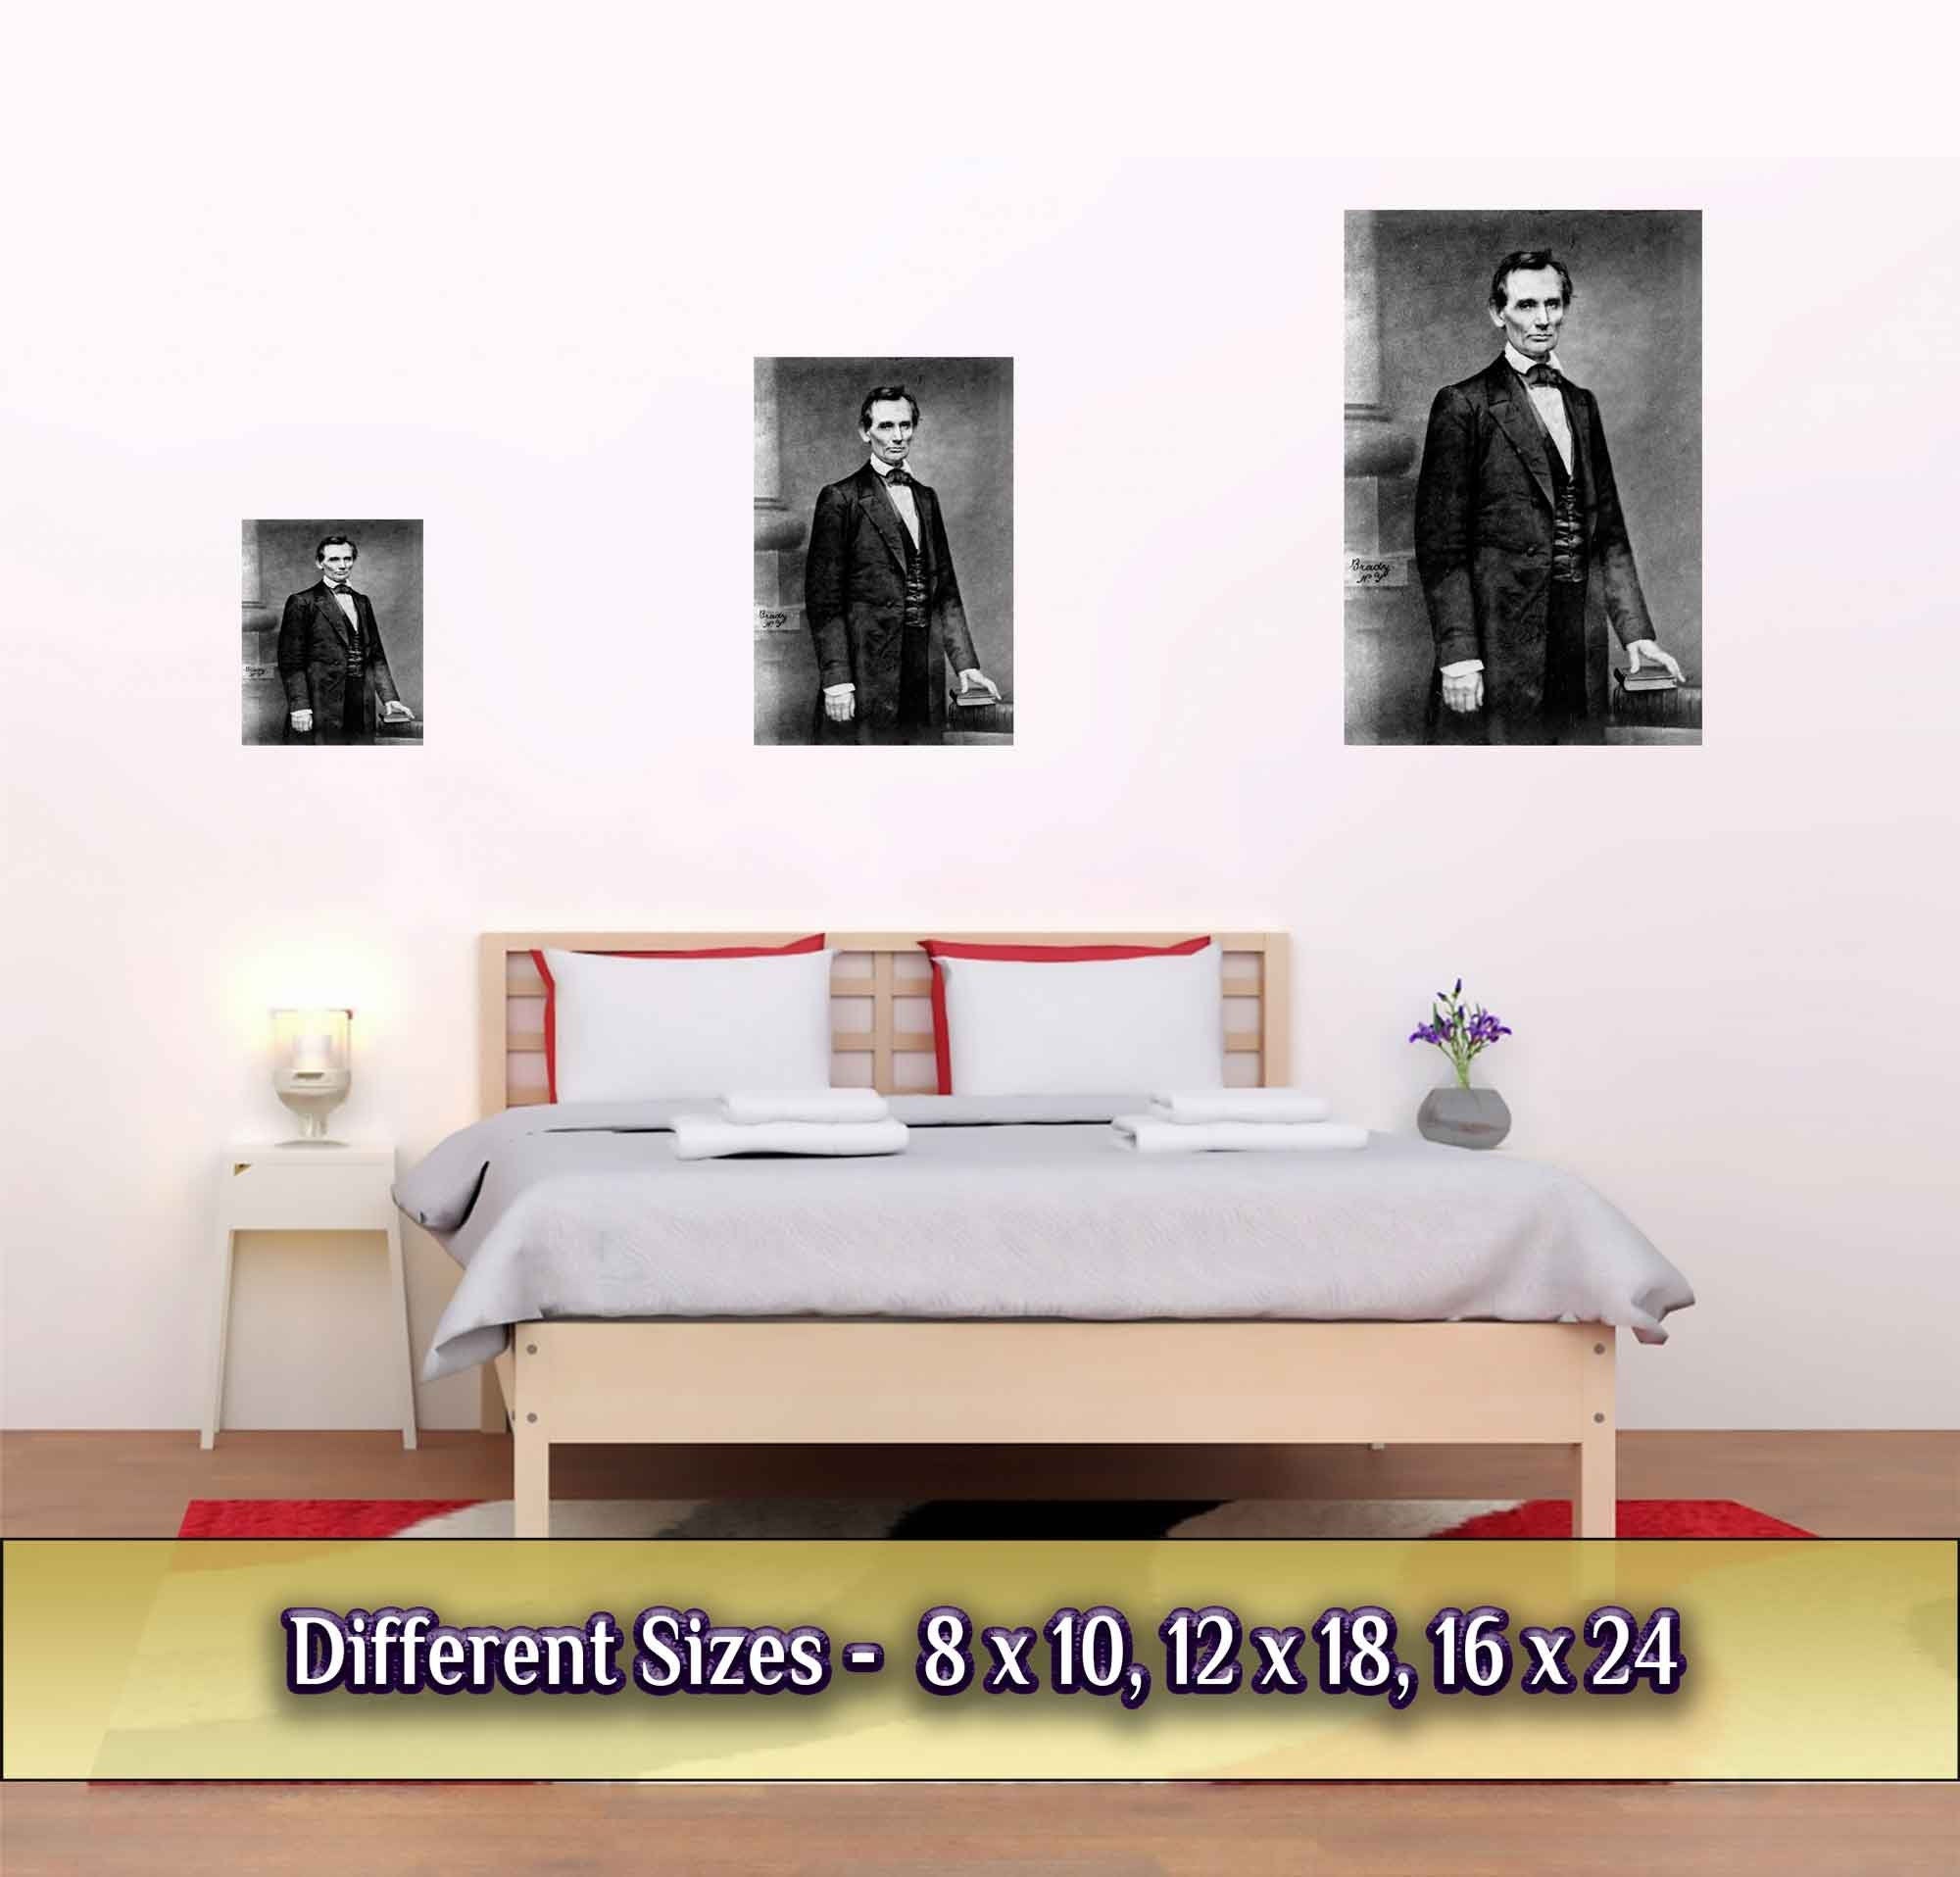 Abraham Lincoln Portrait Photo Poster, Famous Print Photo From 1860, Photo That Propelled Lincoln To Greatness - WallArtPrints4U